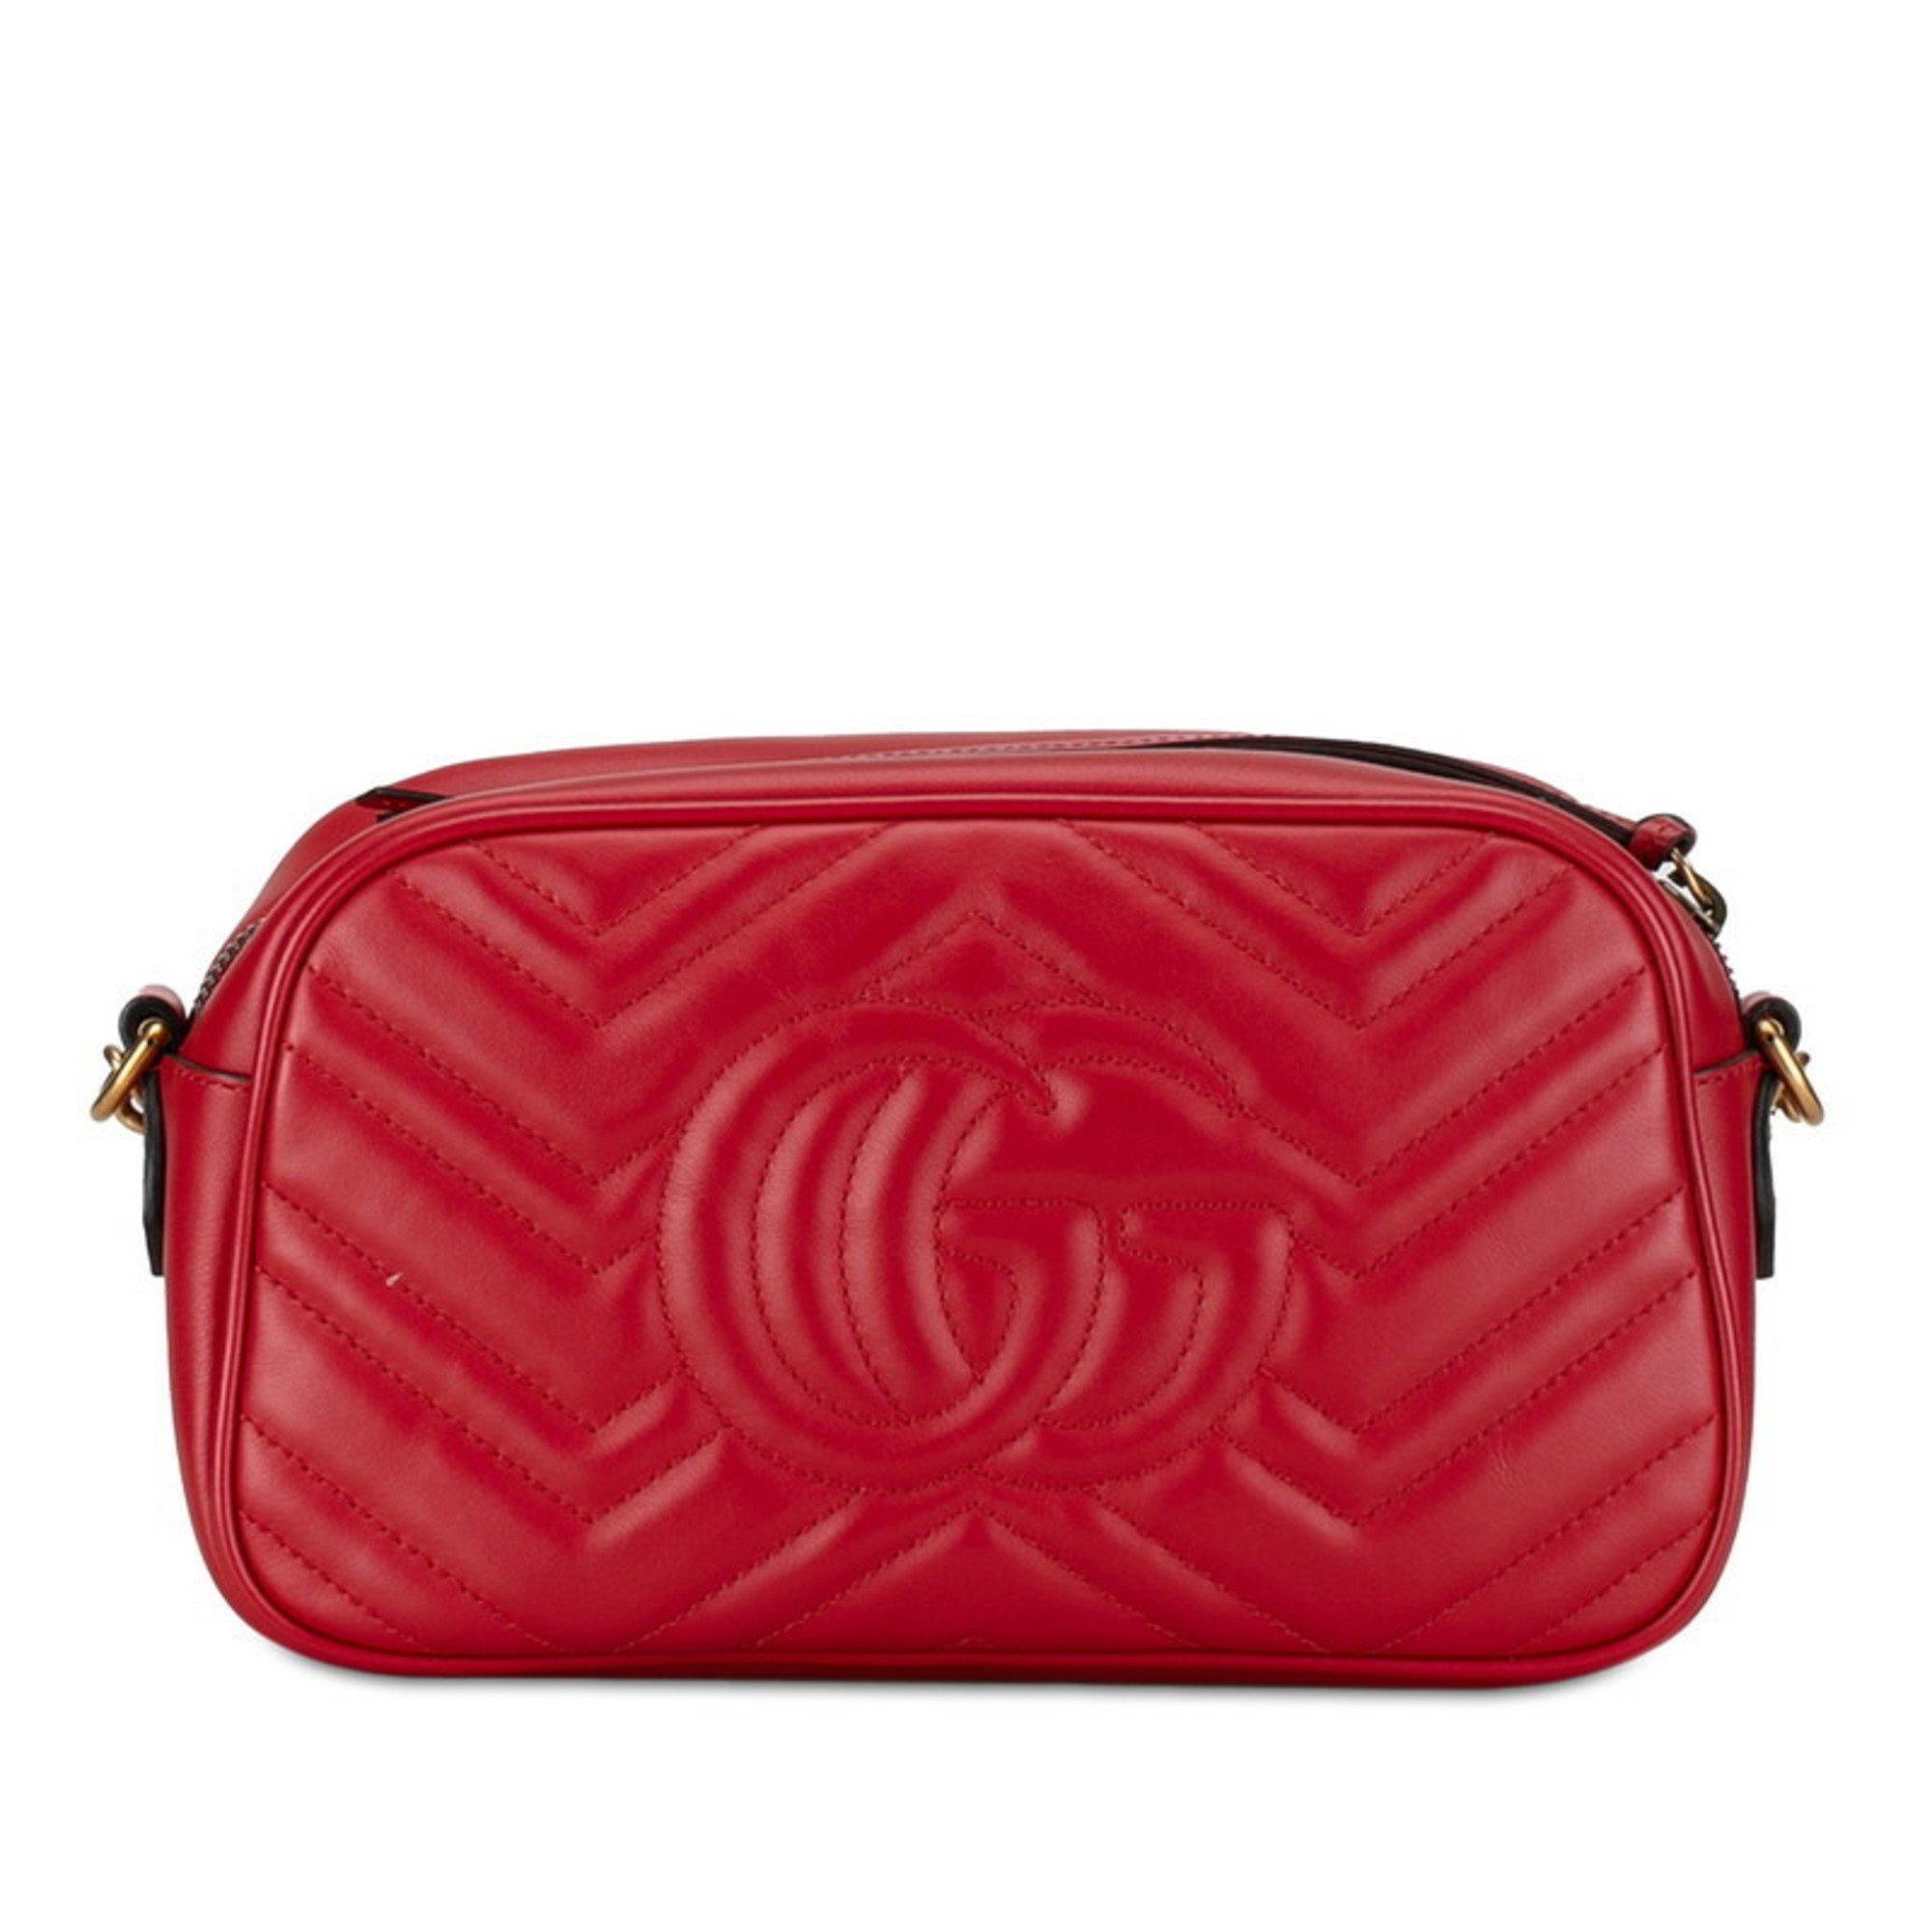 Gucci GG Marmont Quilted Chain Shoulder Bag 447632 Red Leather Women's GUCCI